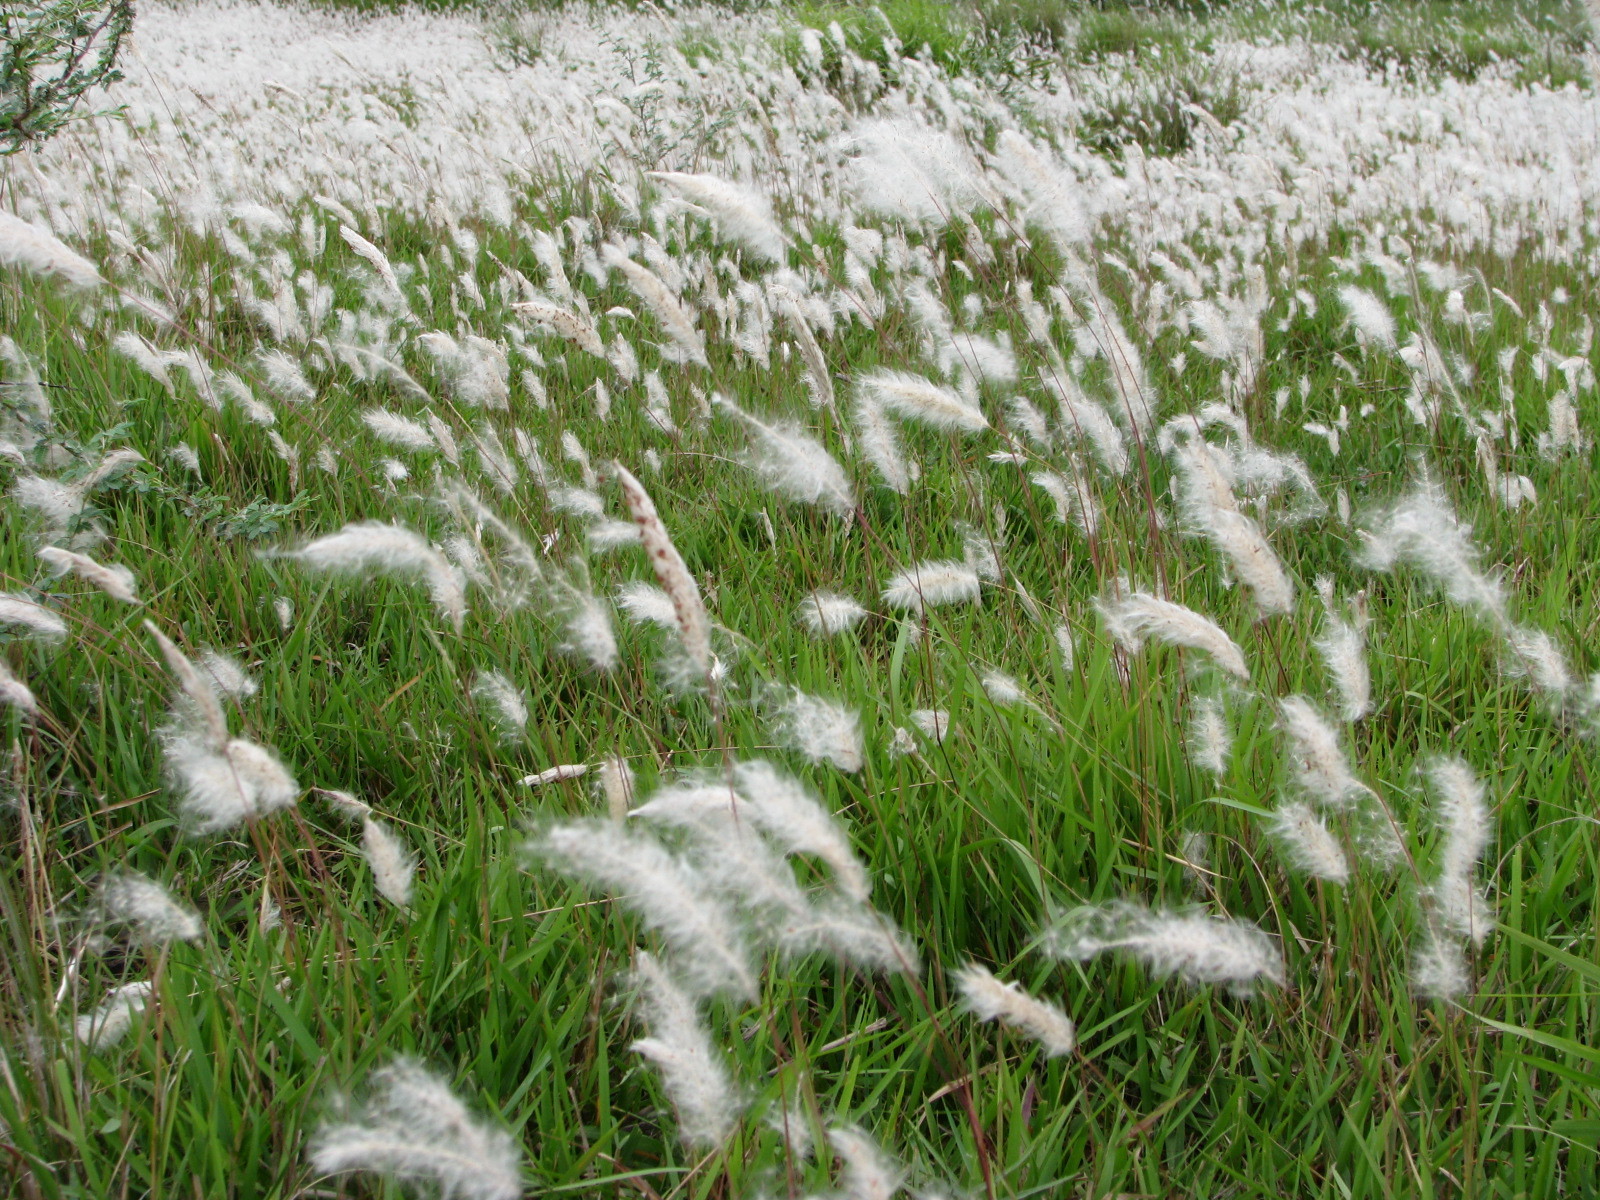 Photograph of a field of cogongrass in Kranataka, India. The photo shows a field of bright green grass plants with feathery white inflorescences.